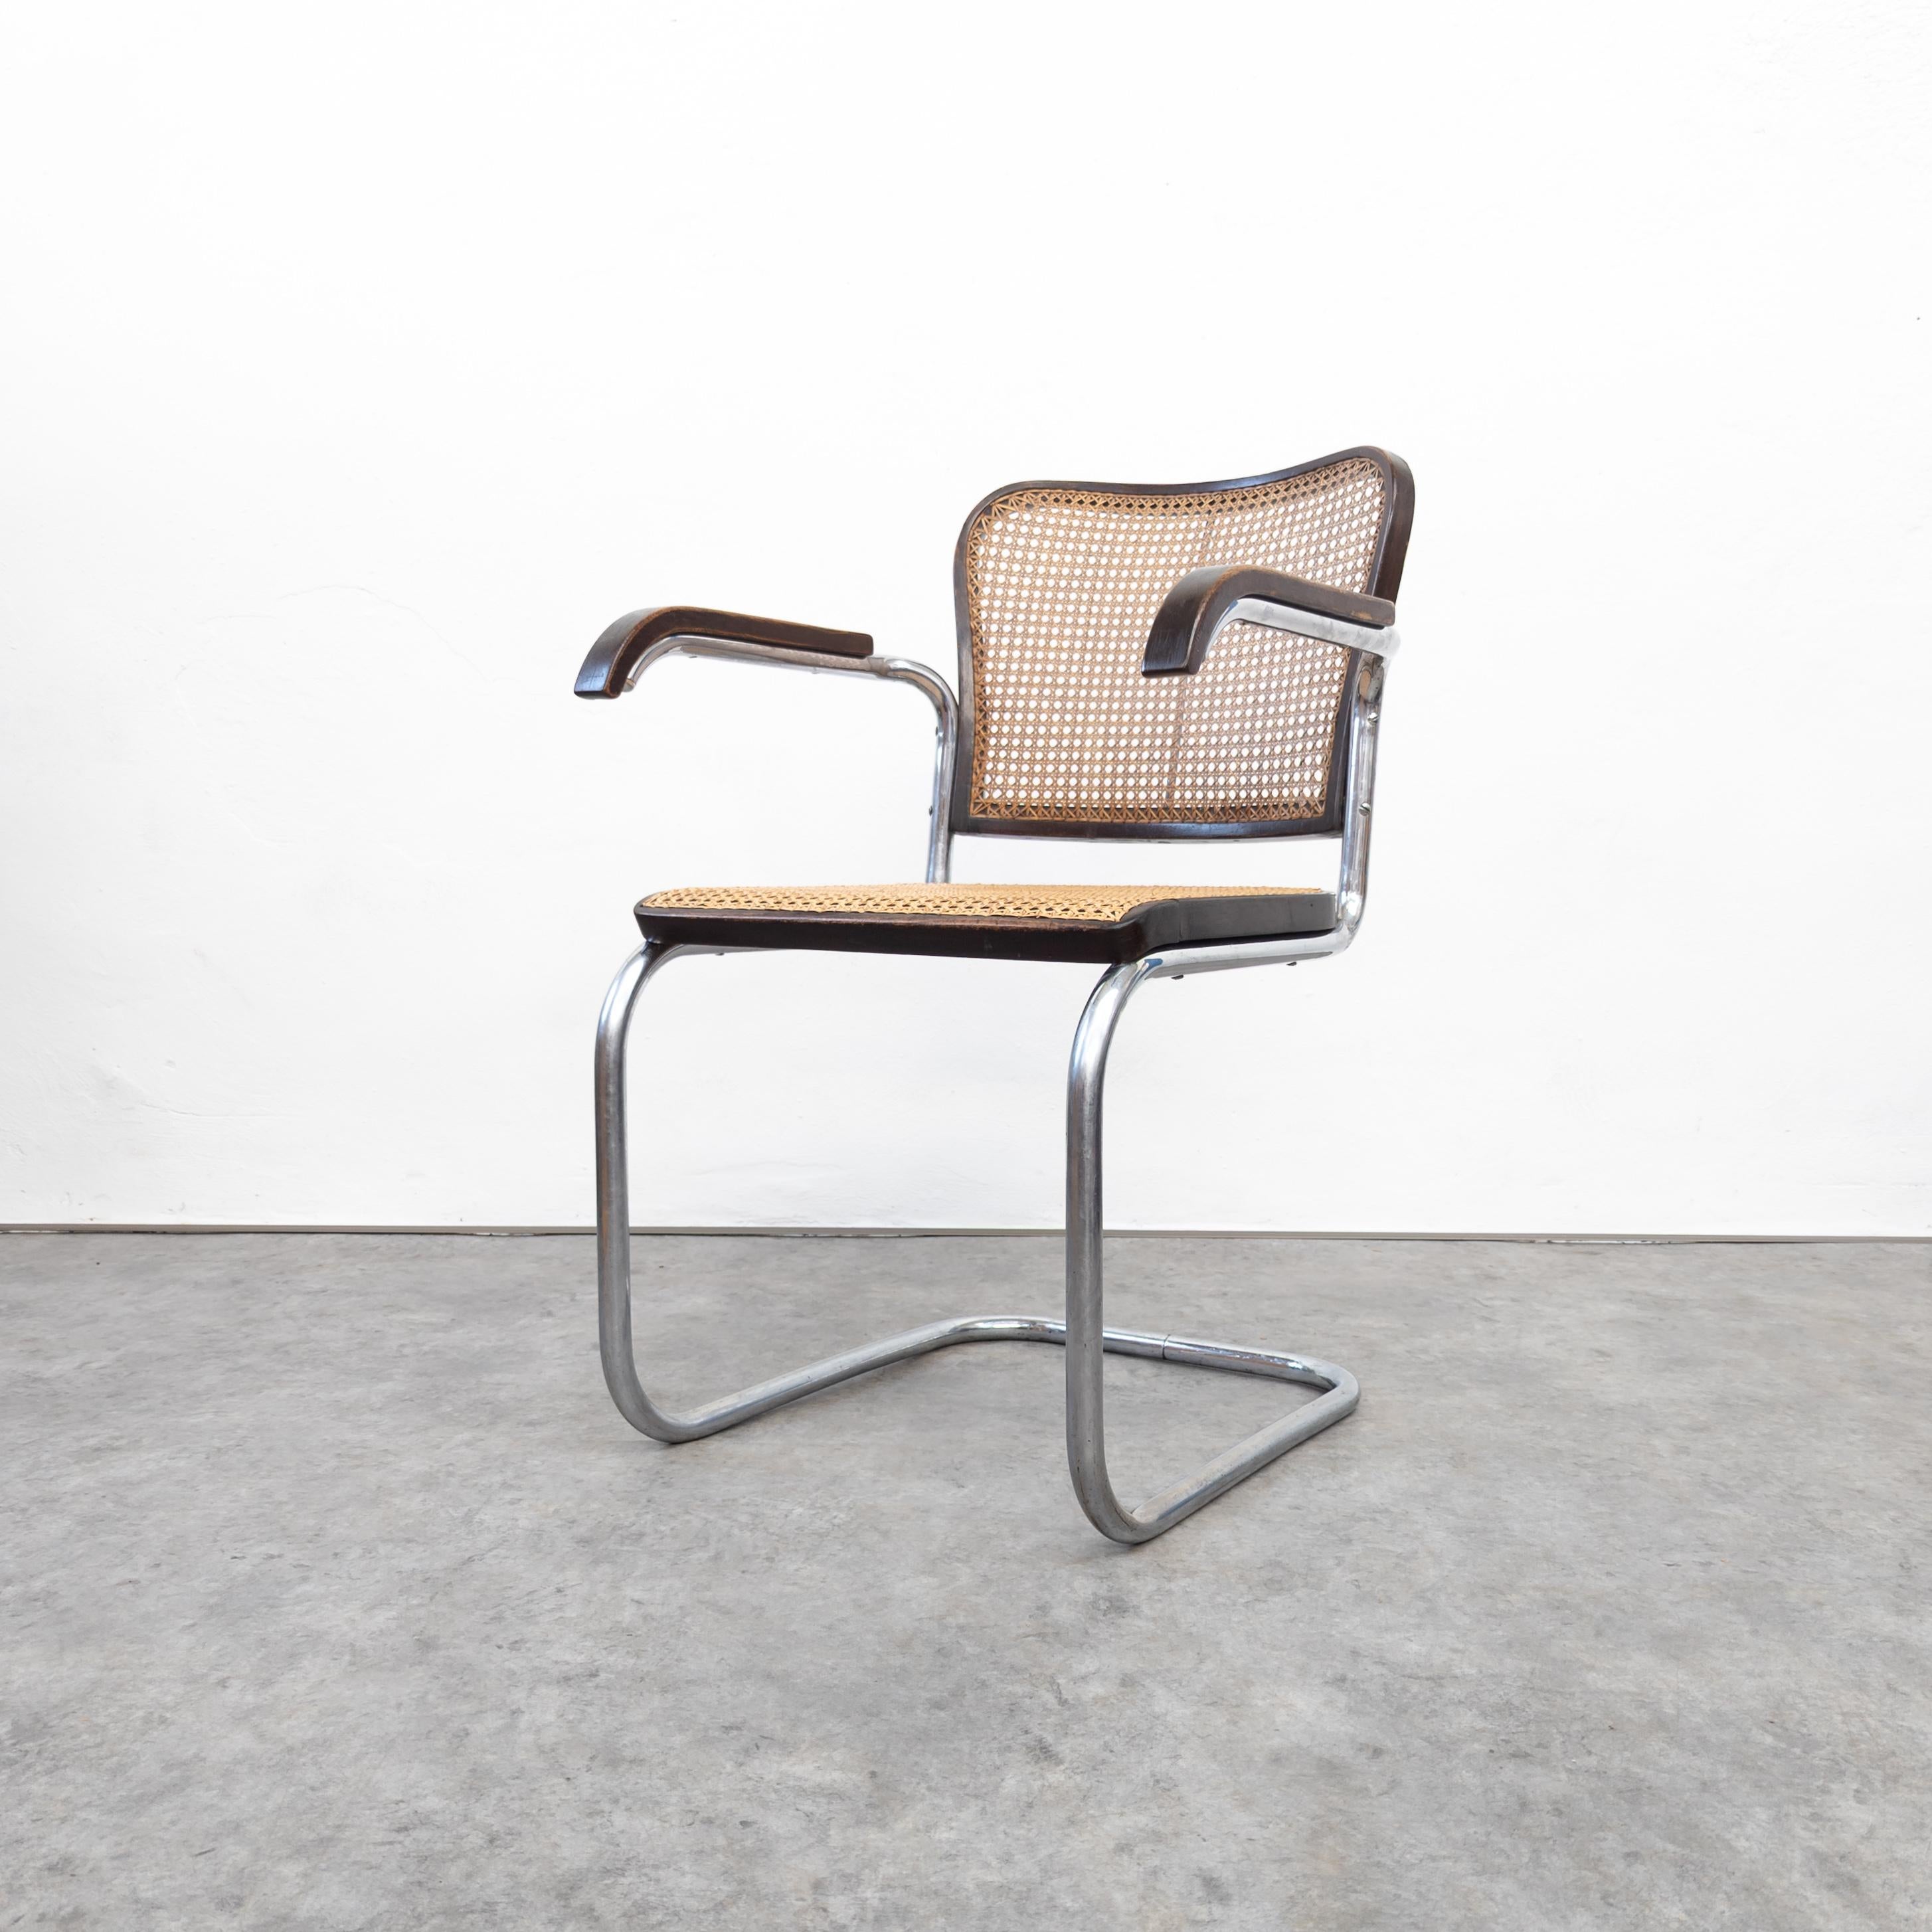 Variation of Marcel Breuers S 64 armchair from Robert Slezák. Very rare armchair manufactured by Slezák company in Bystritz, former Czechoslovakia in 1930s. Chrome plated tubular steel, beech wood and cane. In very good original condition with newly